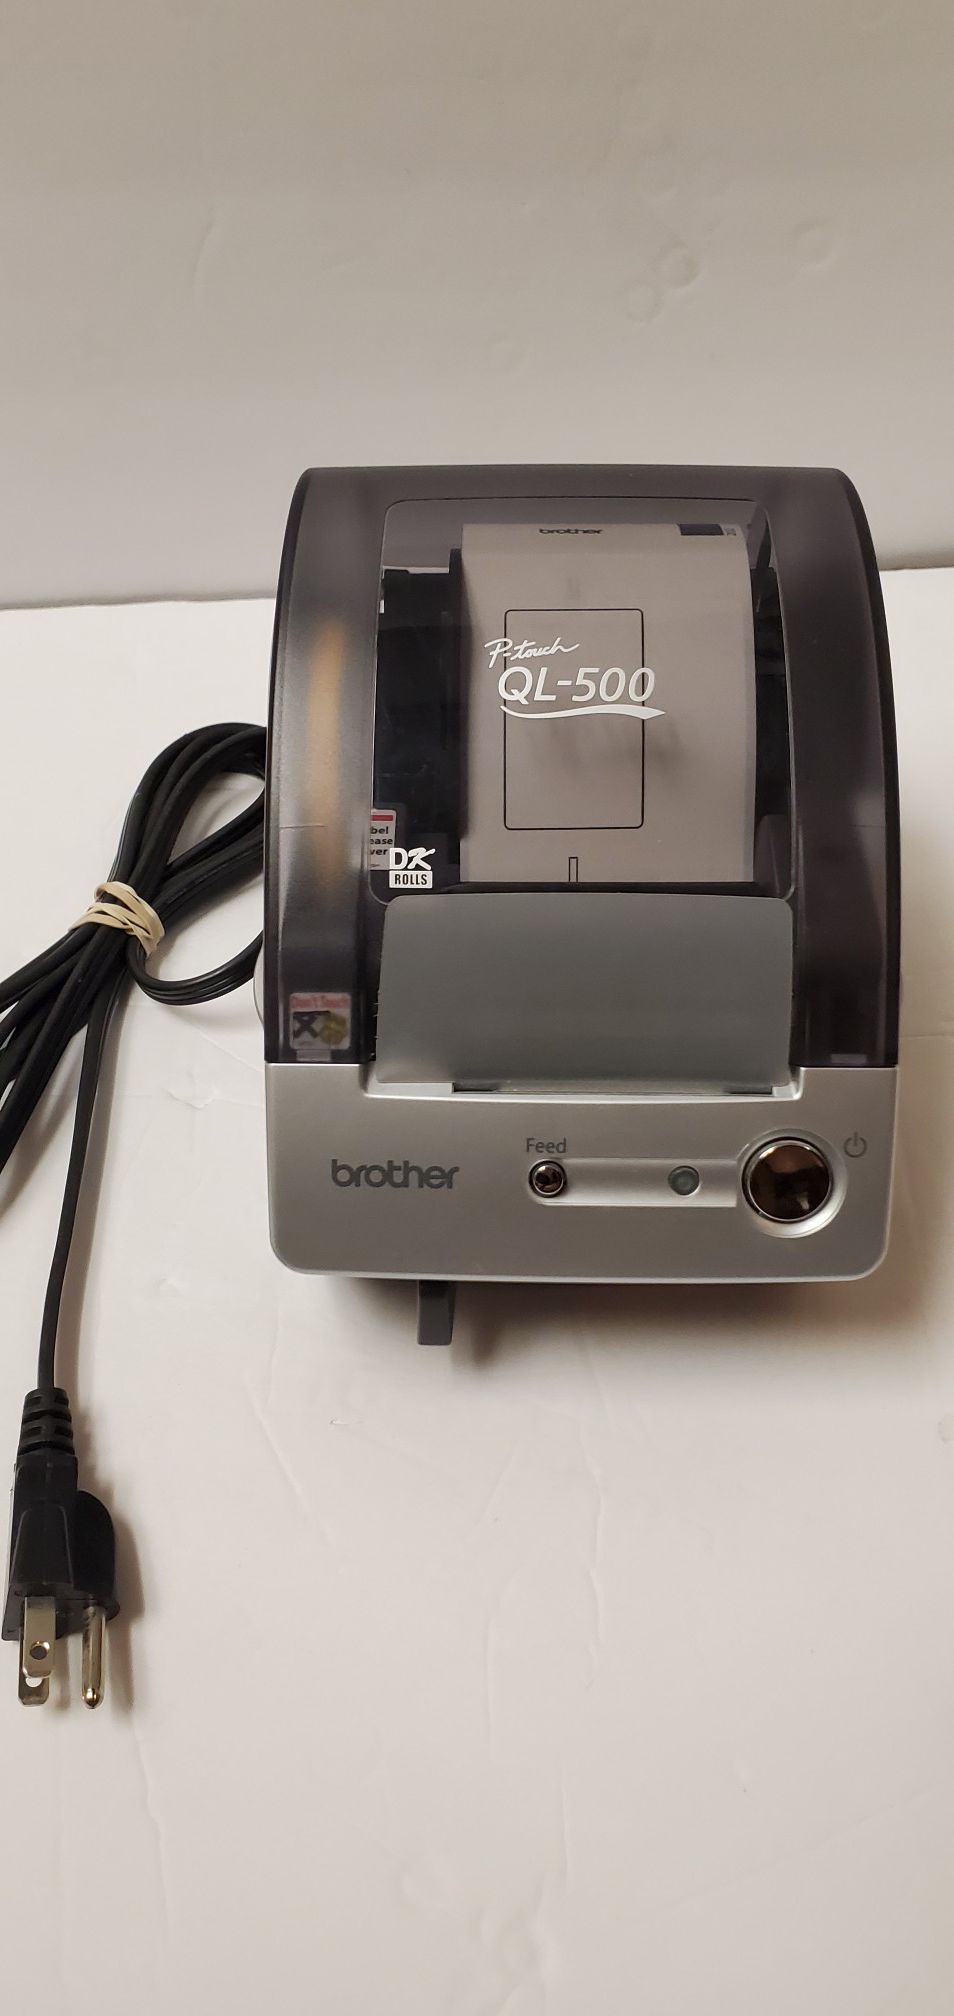 Brother QL-500 P-Touch Thermal Label Printer w/ USB Cable and CD-ROM